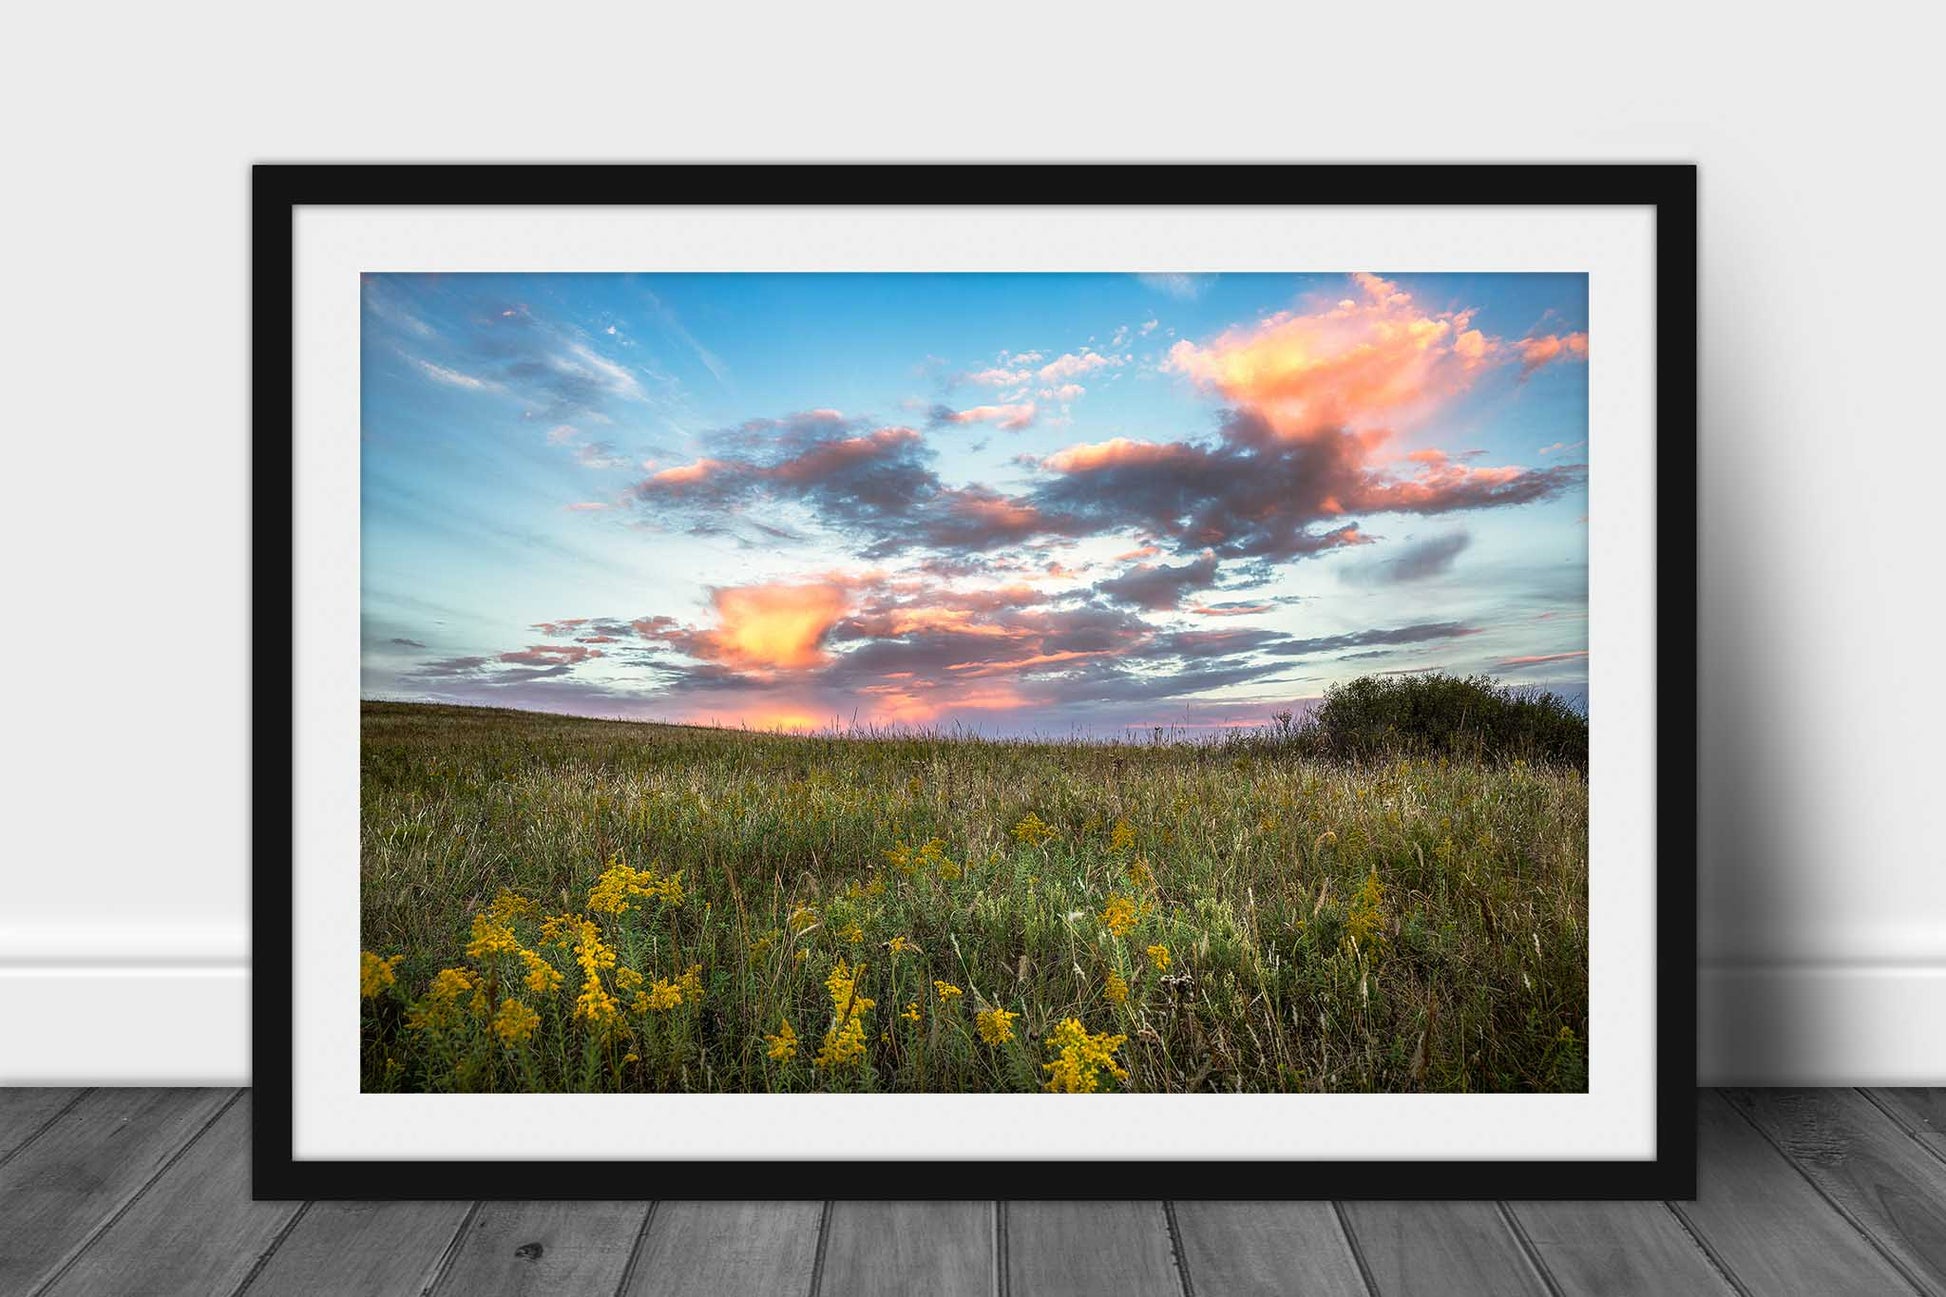 Framed landscape photography print of clouds illuminated by sunlight at sunset on an autumn evening over the tallgrass prairie in Osage County, Oklahoma by Sean Ramsey of Southern Plains Photography.